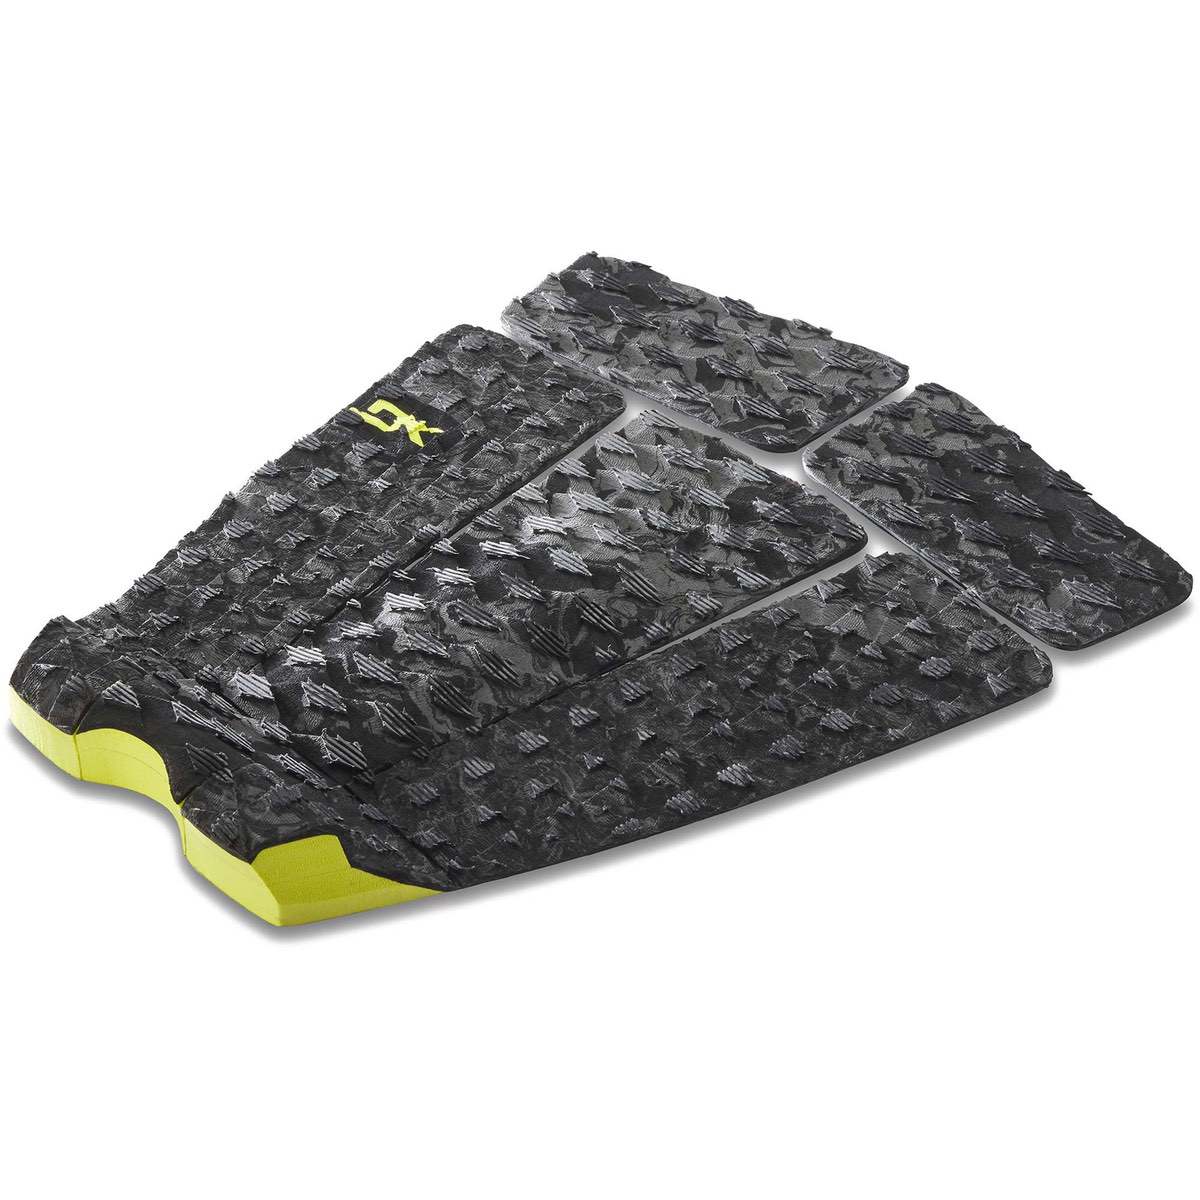 Dakine Bruce Irons Pro Surf Traction Pad Traction Pad Electrical tropical